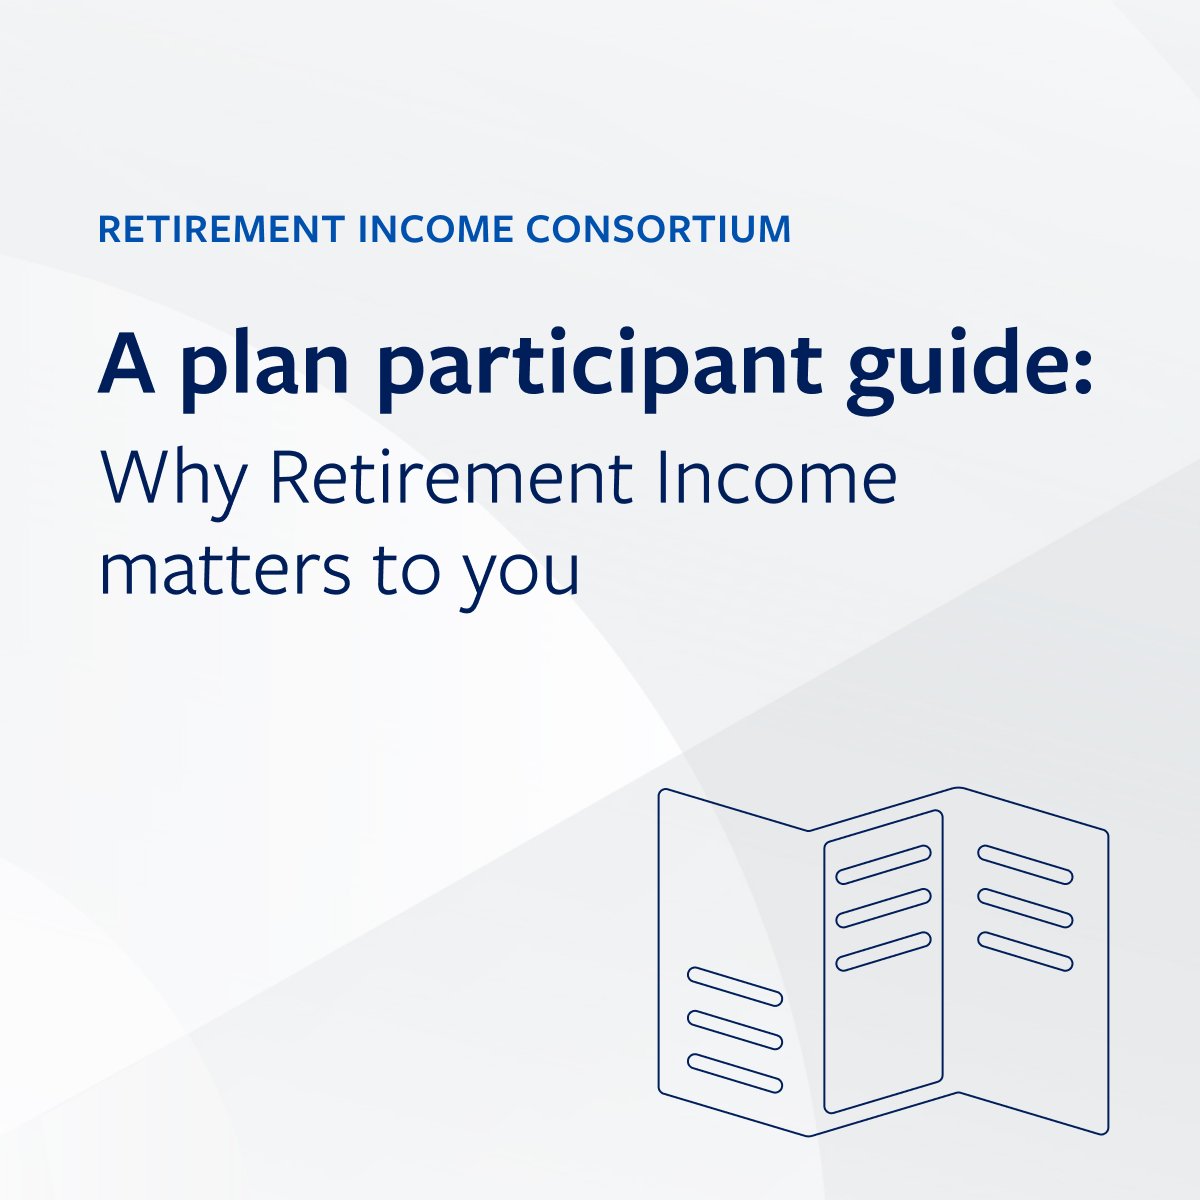 The Retirement Income Consortium is providing a Plan Participant Guide for advisors to use when communicating the five risks faced in handling savings to retirees: broadridge.com/resource/asset… #AssesmentManagementInsights #WealthManagement #MFRS #RetirementIncomeConsortium